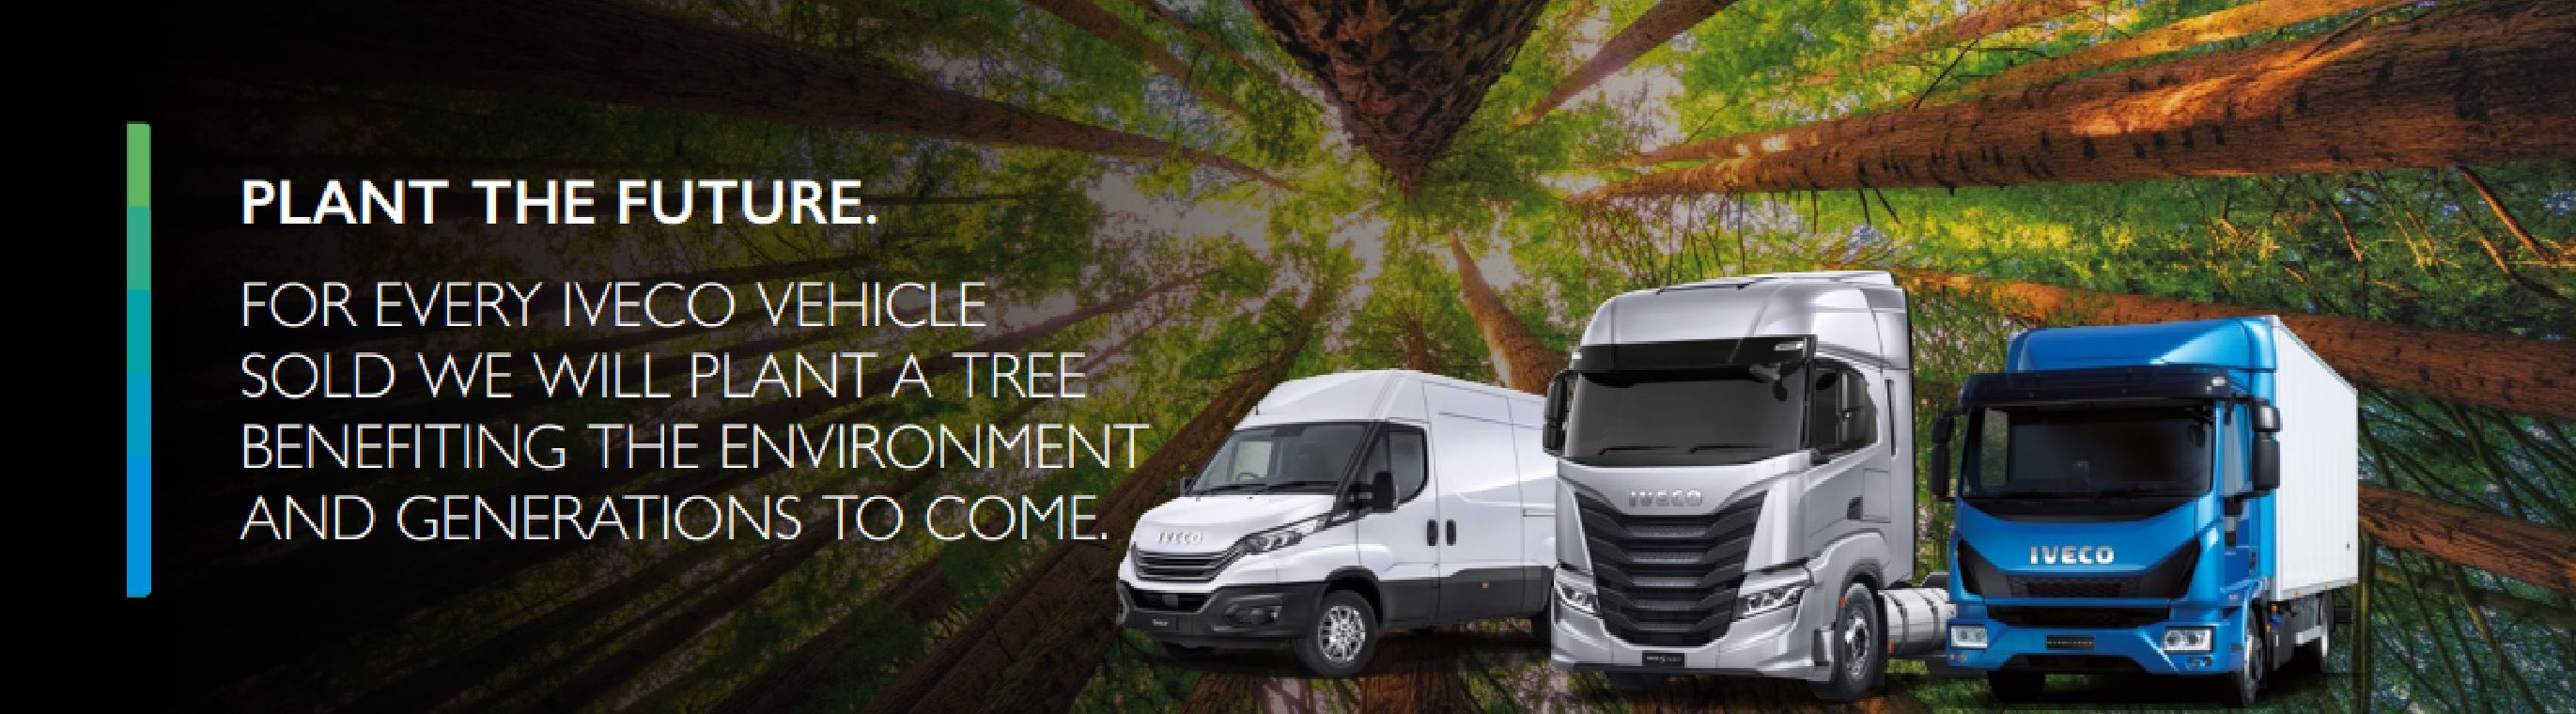 PLANT A TREE IVECO Retail Limited